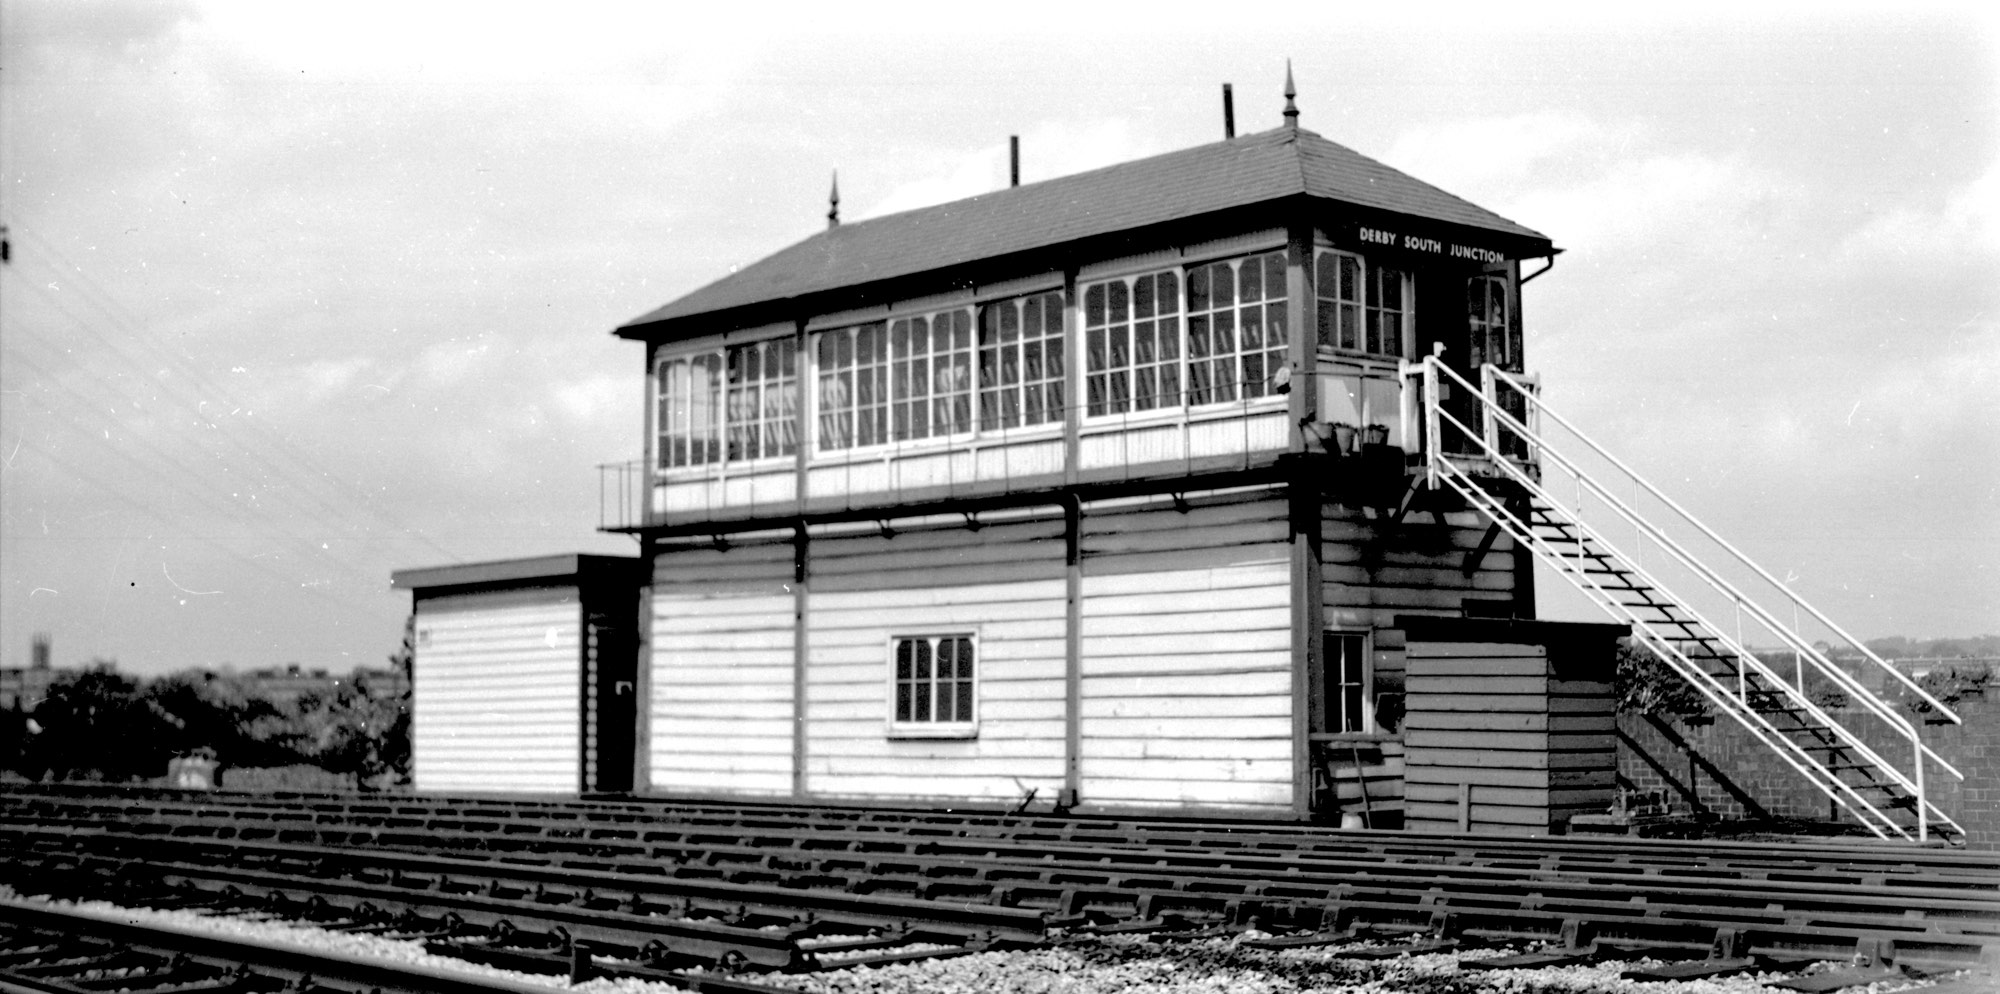 Derby South Junction signal box